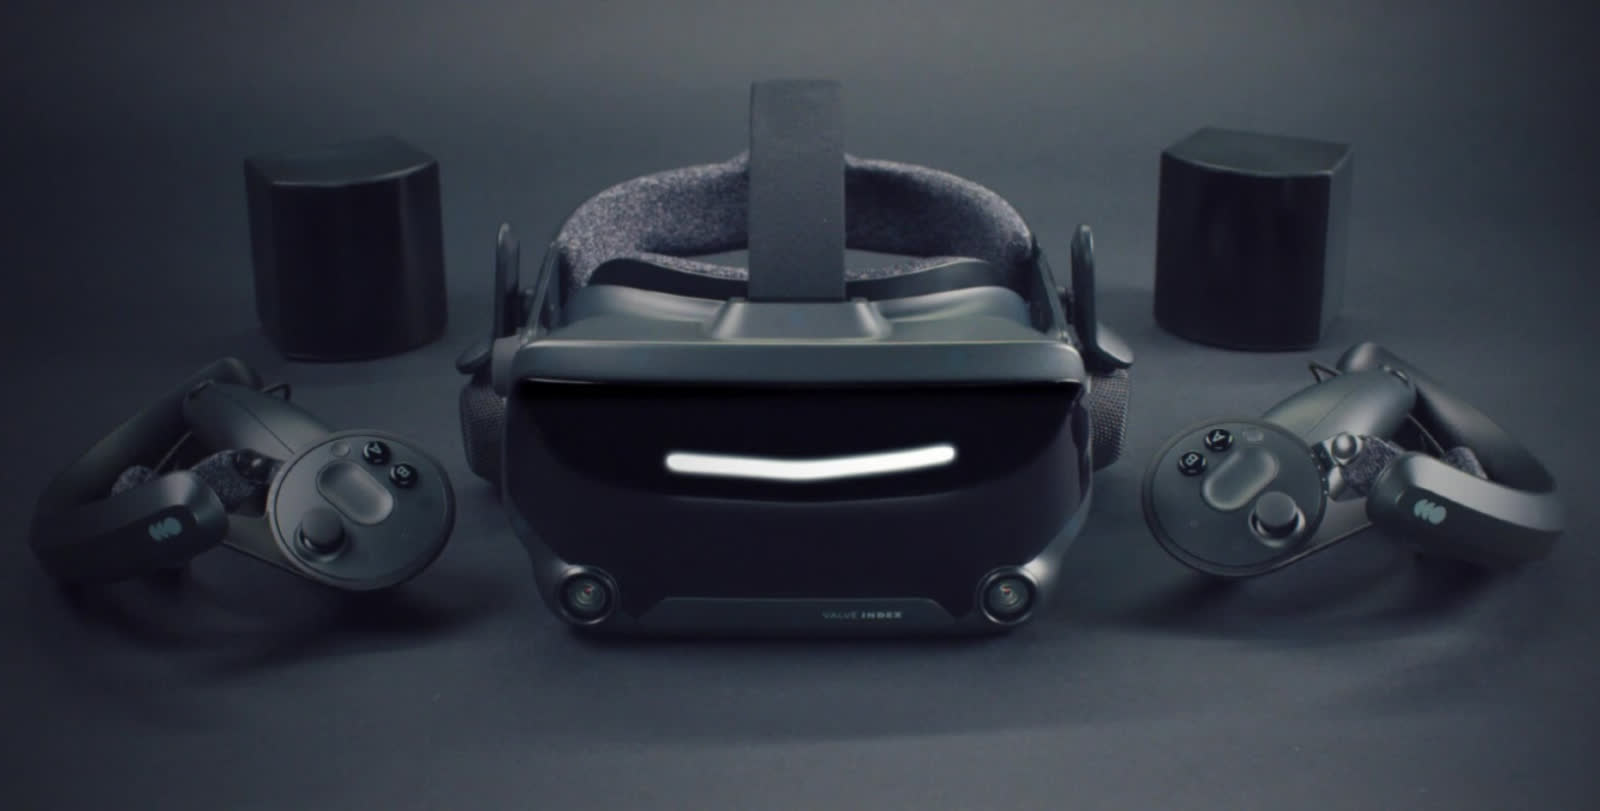 $1,000 Valve Index becomes 2nd most popular VR headset on Steam